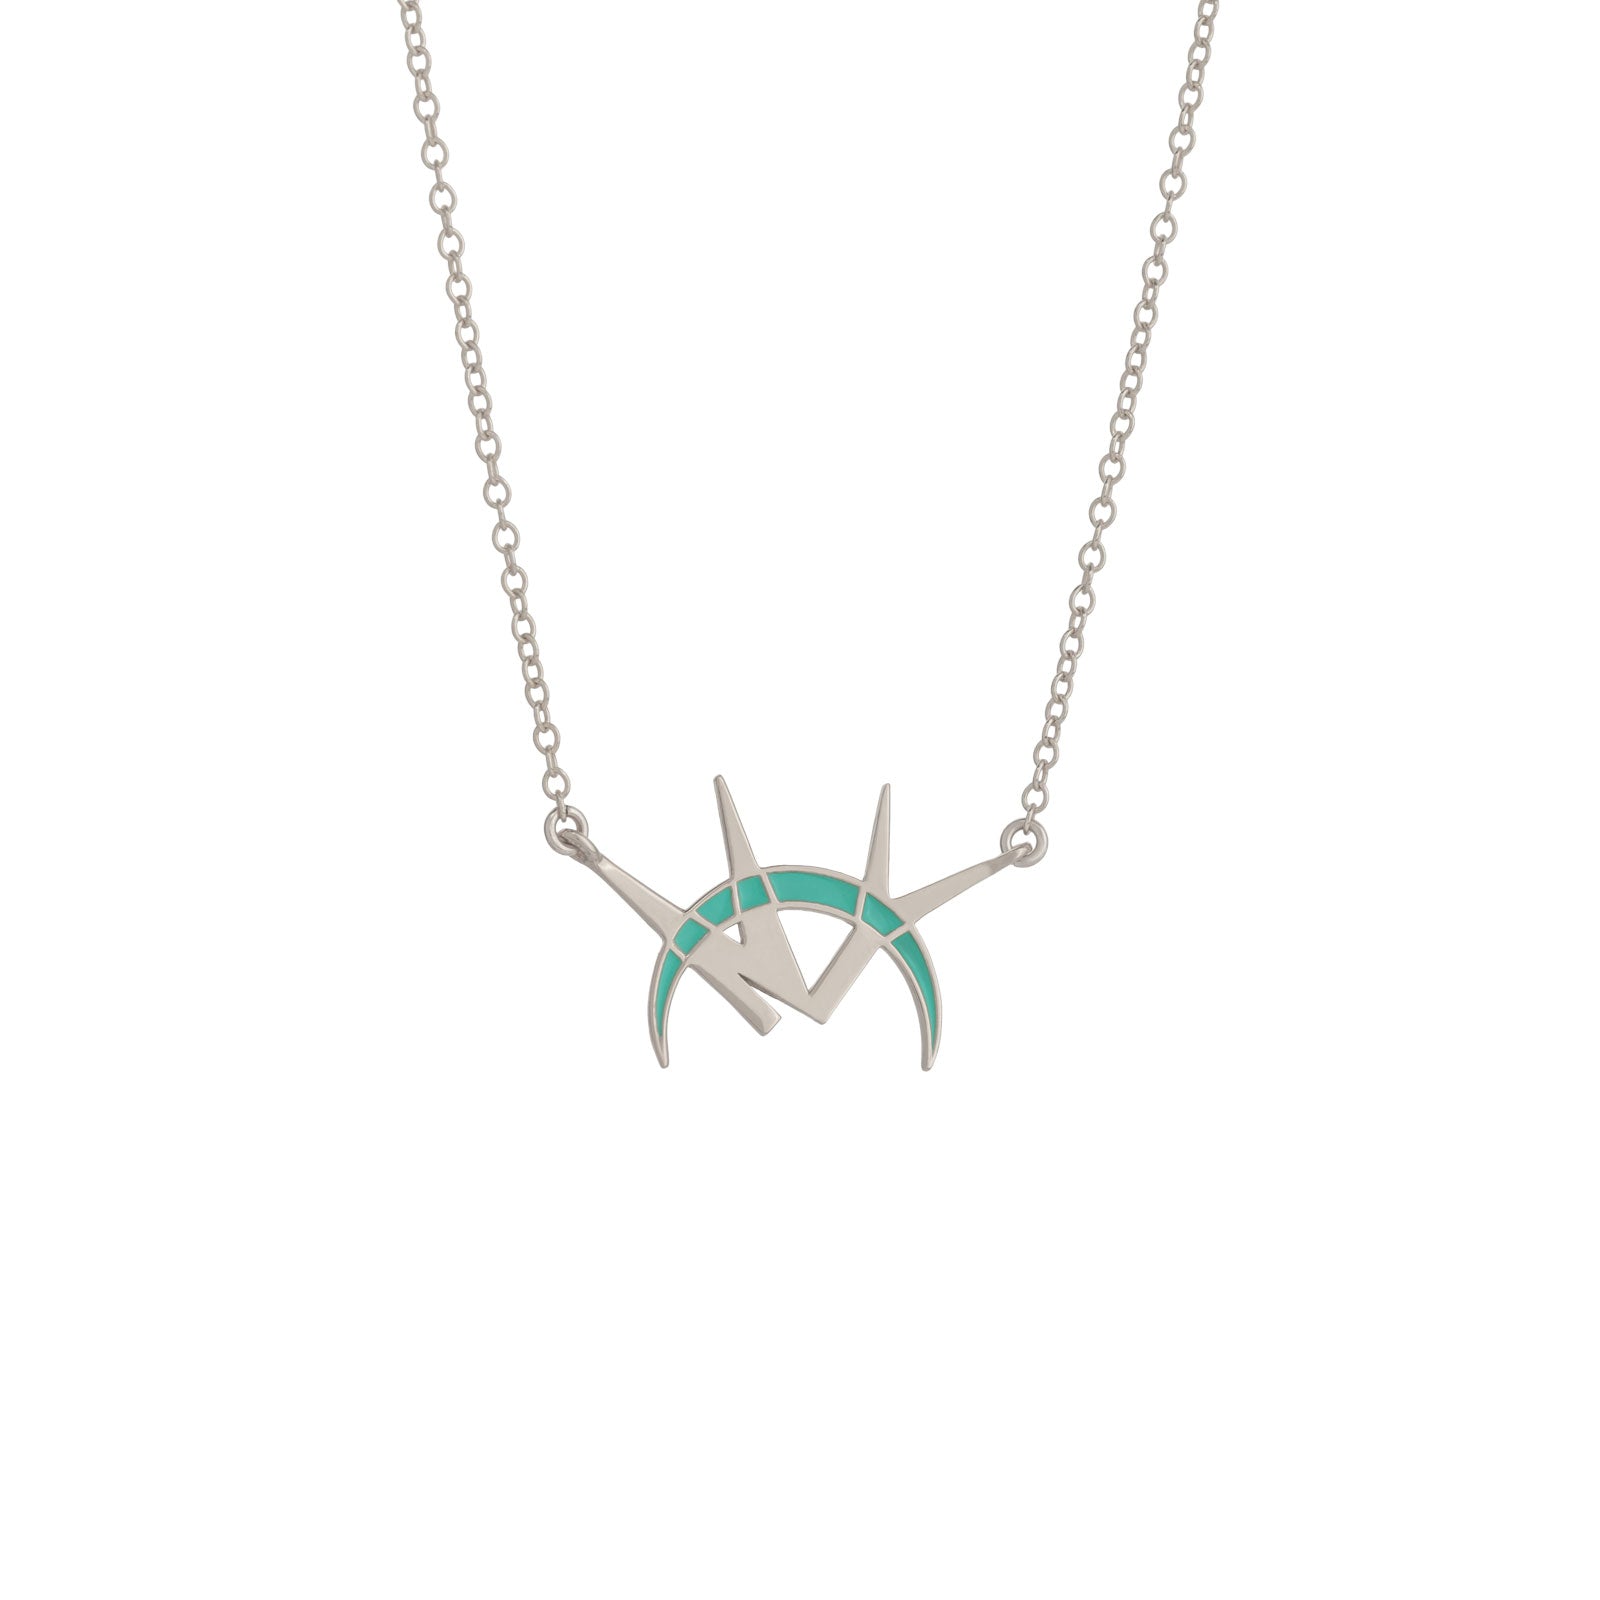 mini NYC necklace lady liberty in sterling silver and mint green enamel